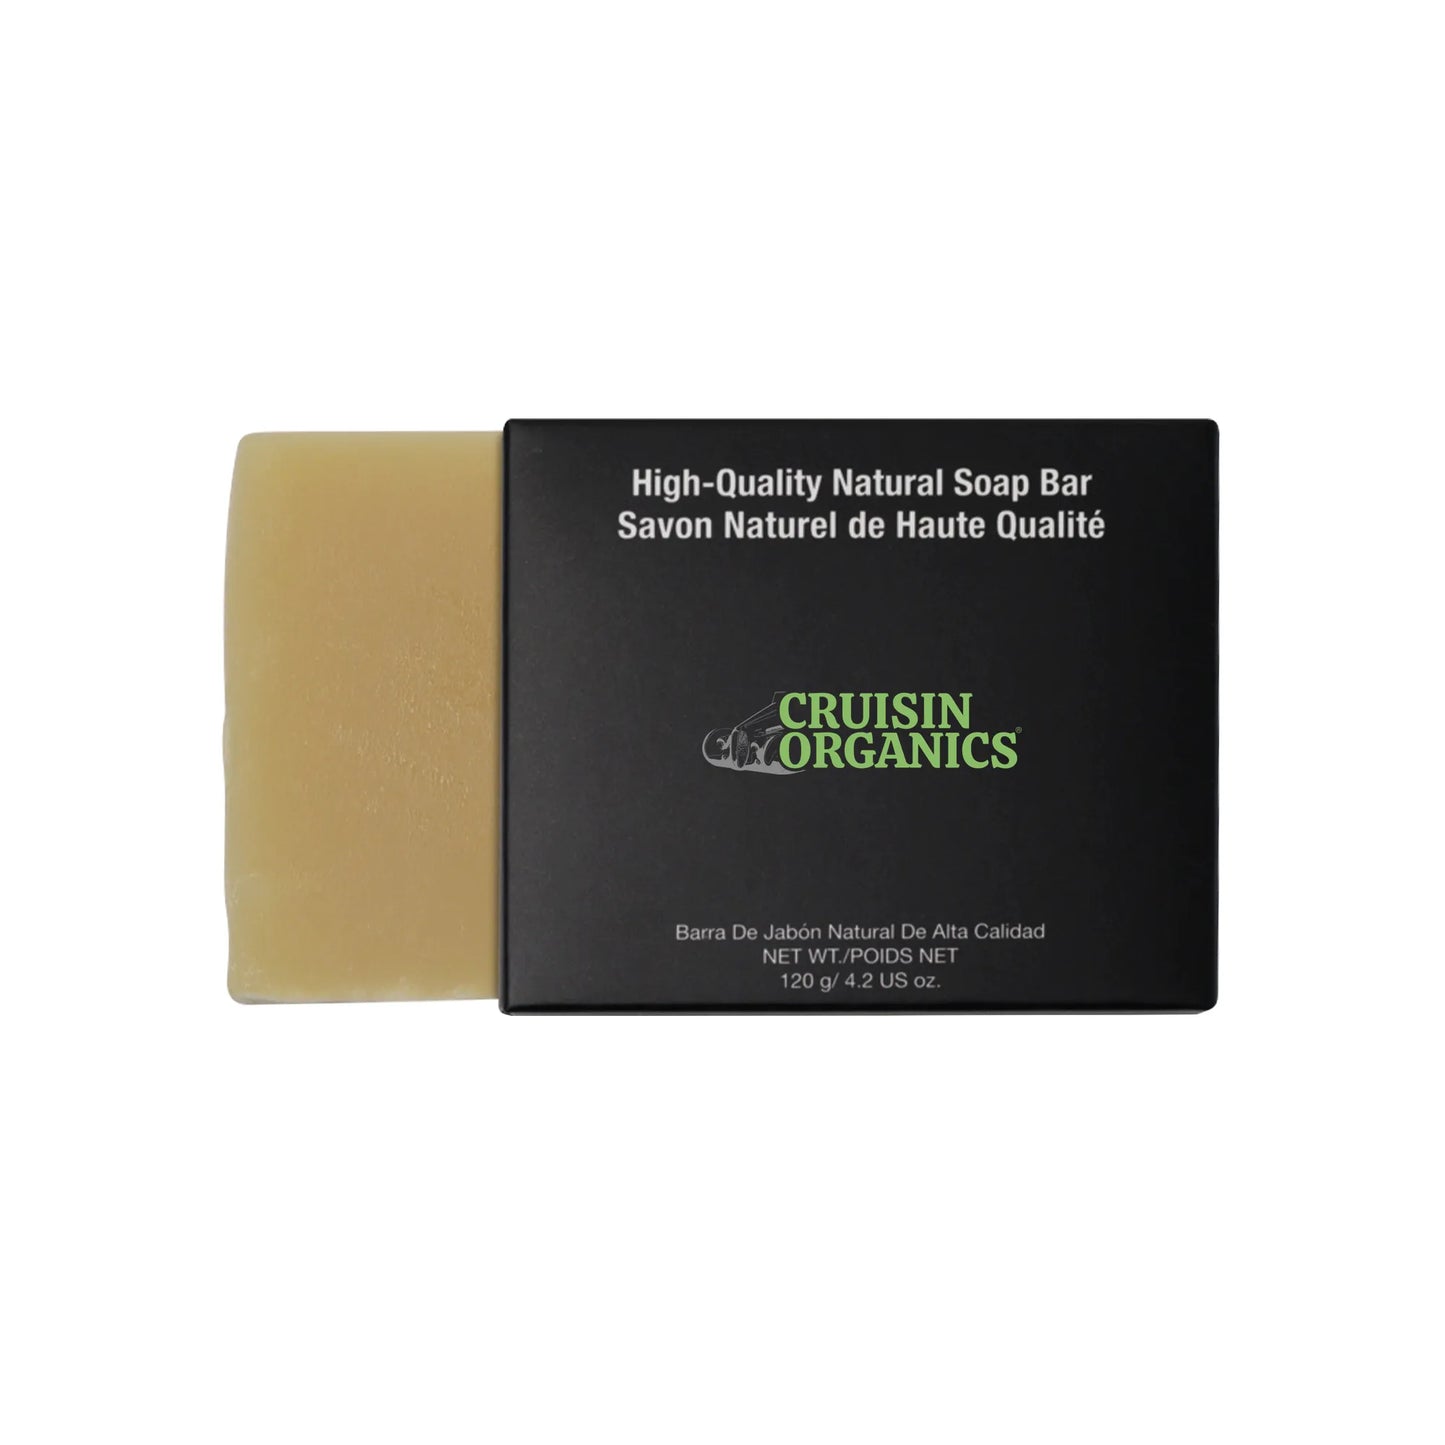 "Get ready for a good night's sleep with Cruisin Organics Lavender & Rosemary Spa Soap! Its natural lavender and rosemary oils provide a healing cleanse and soothing aroma for relaxation. Perfect for face, body, and hands."